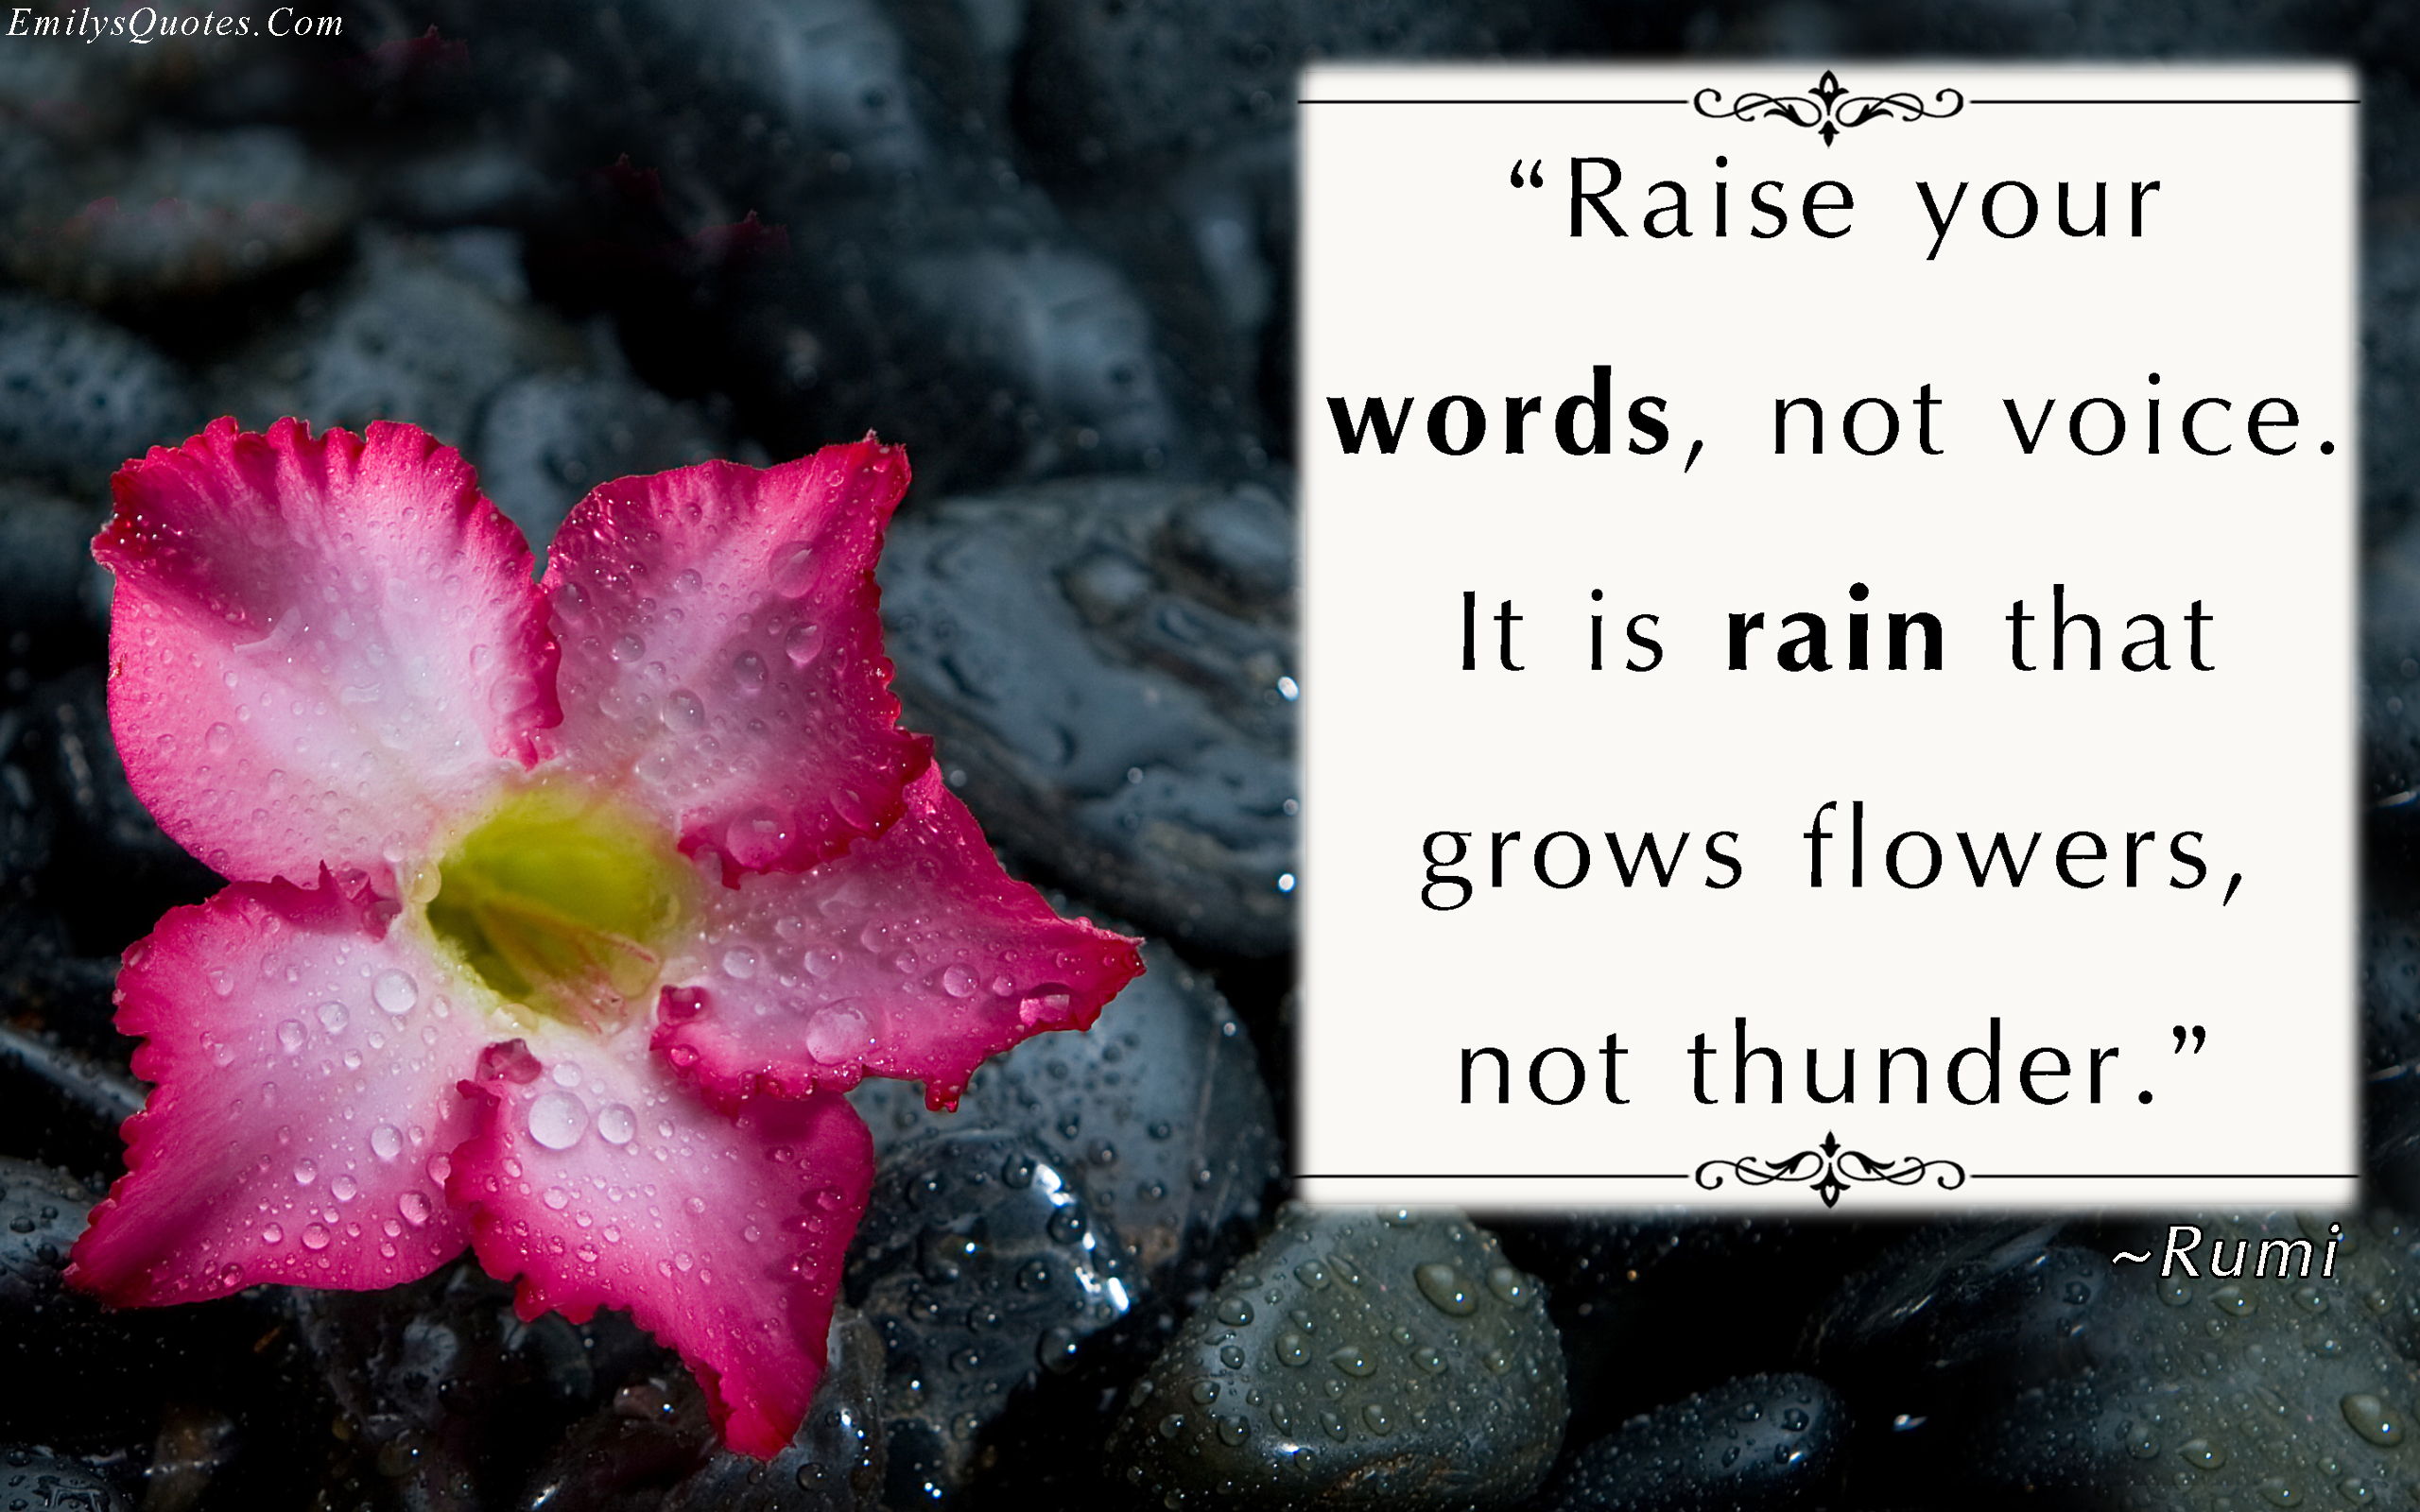 Raise your words, not voice. It is rain that grows flowers, not thunder